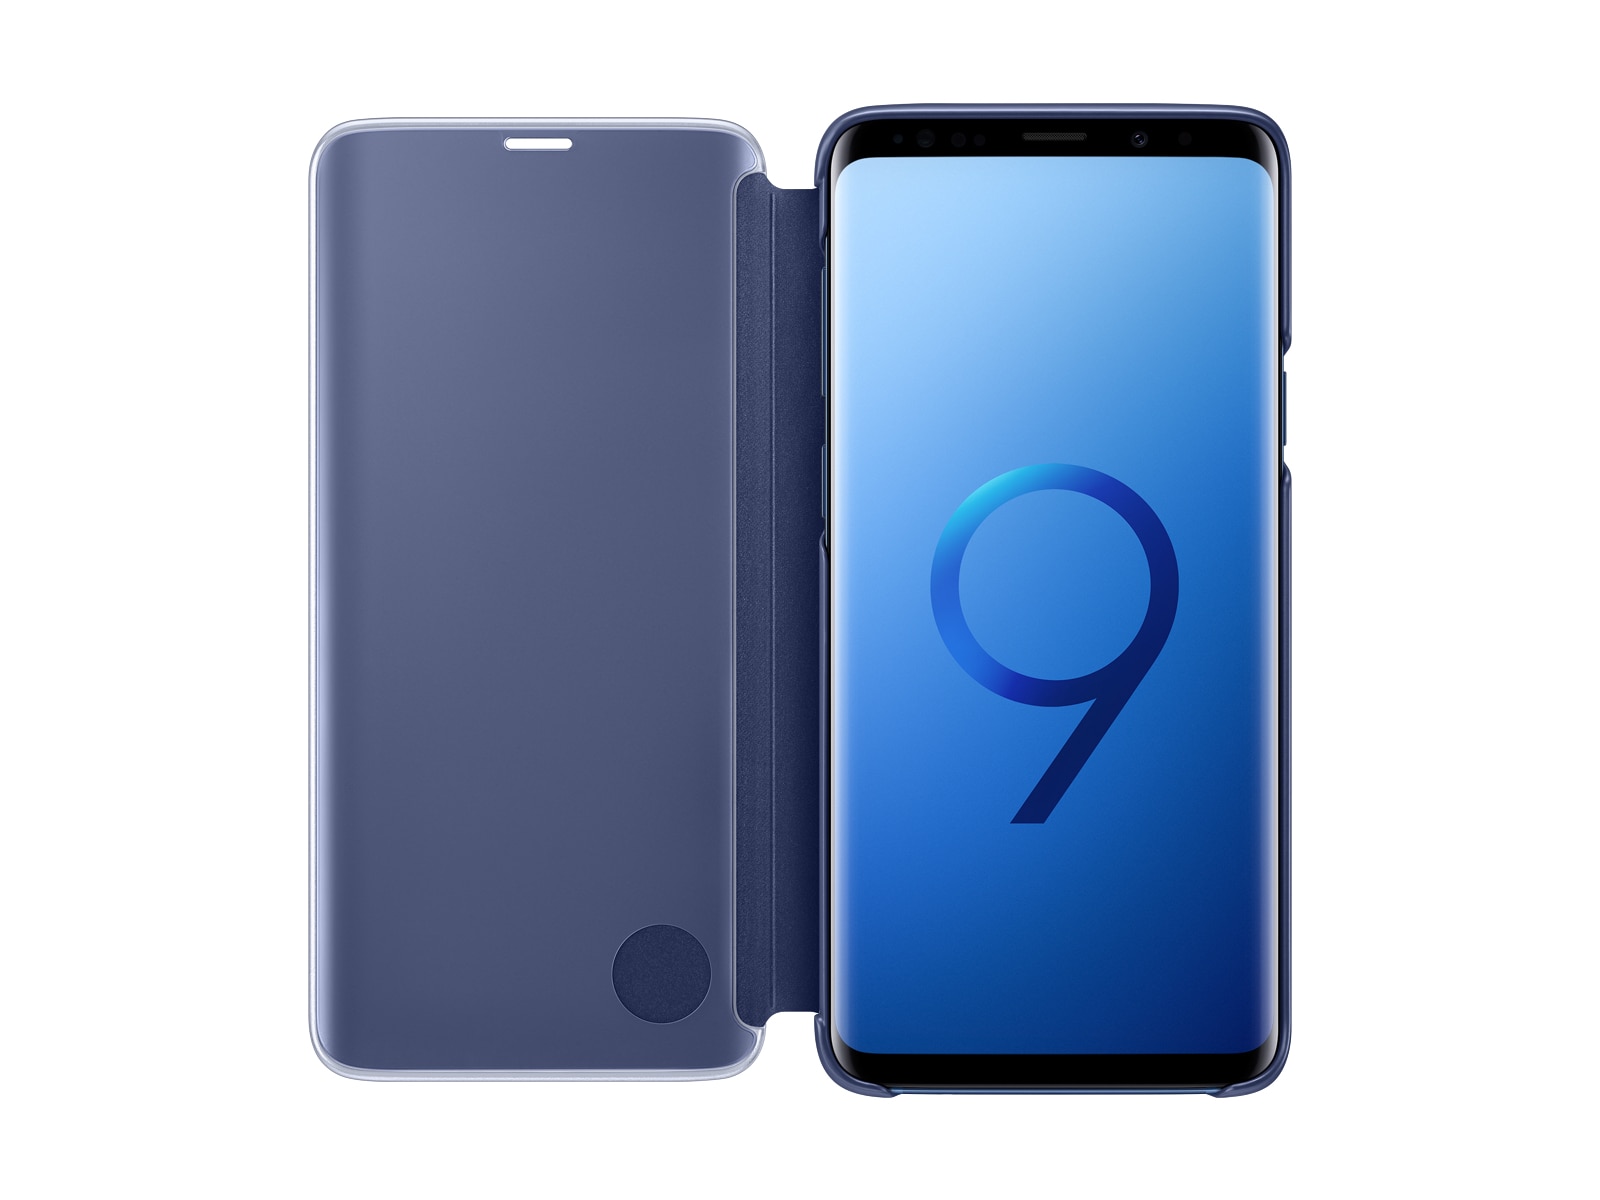 Thumbnail image of Galaxy S9+ S-View Cover, Blue